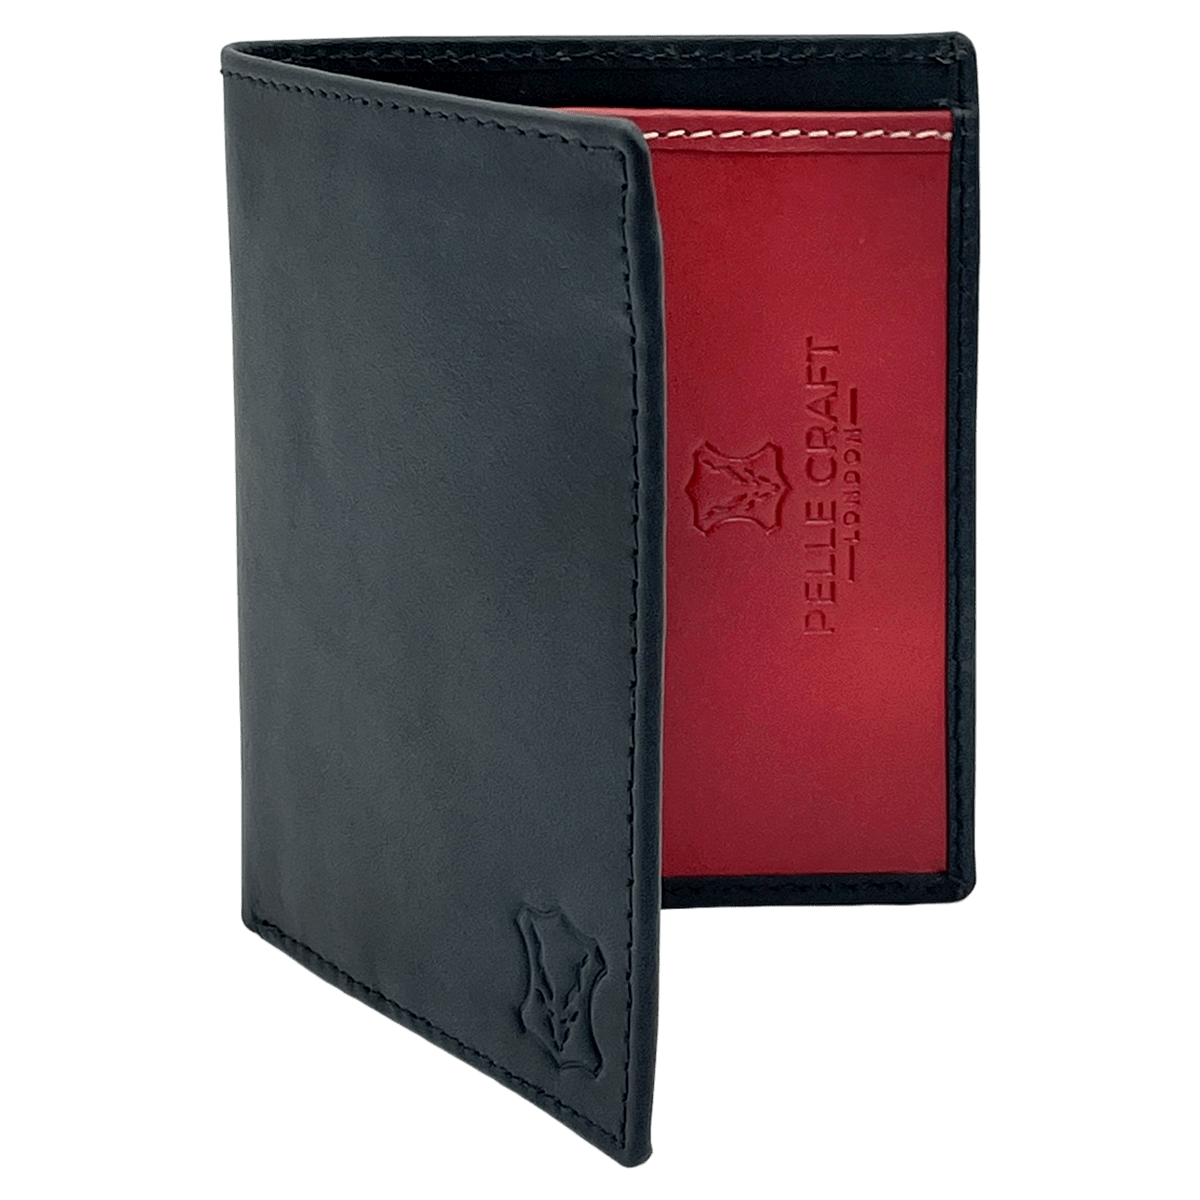 Bifold Slim Card Wallet with 8 c/c